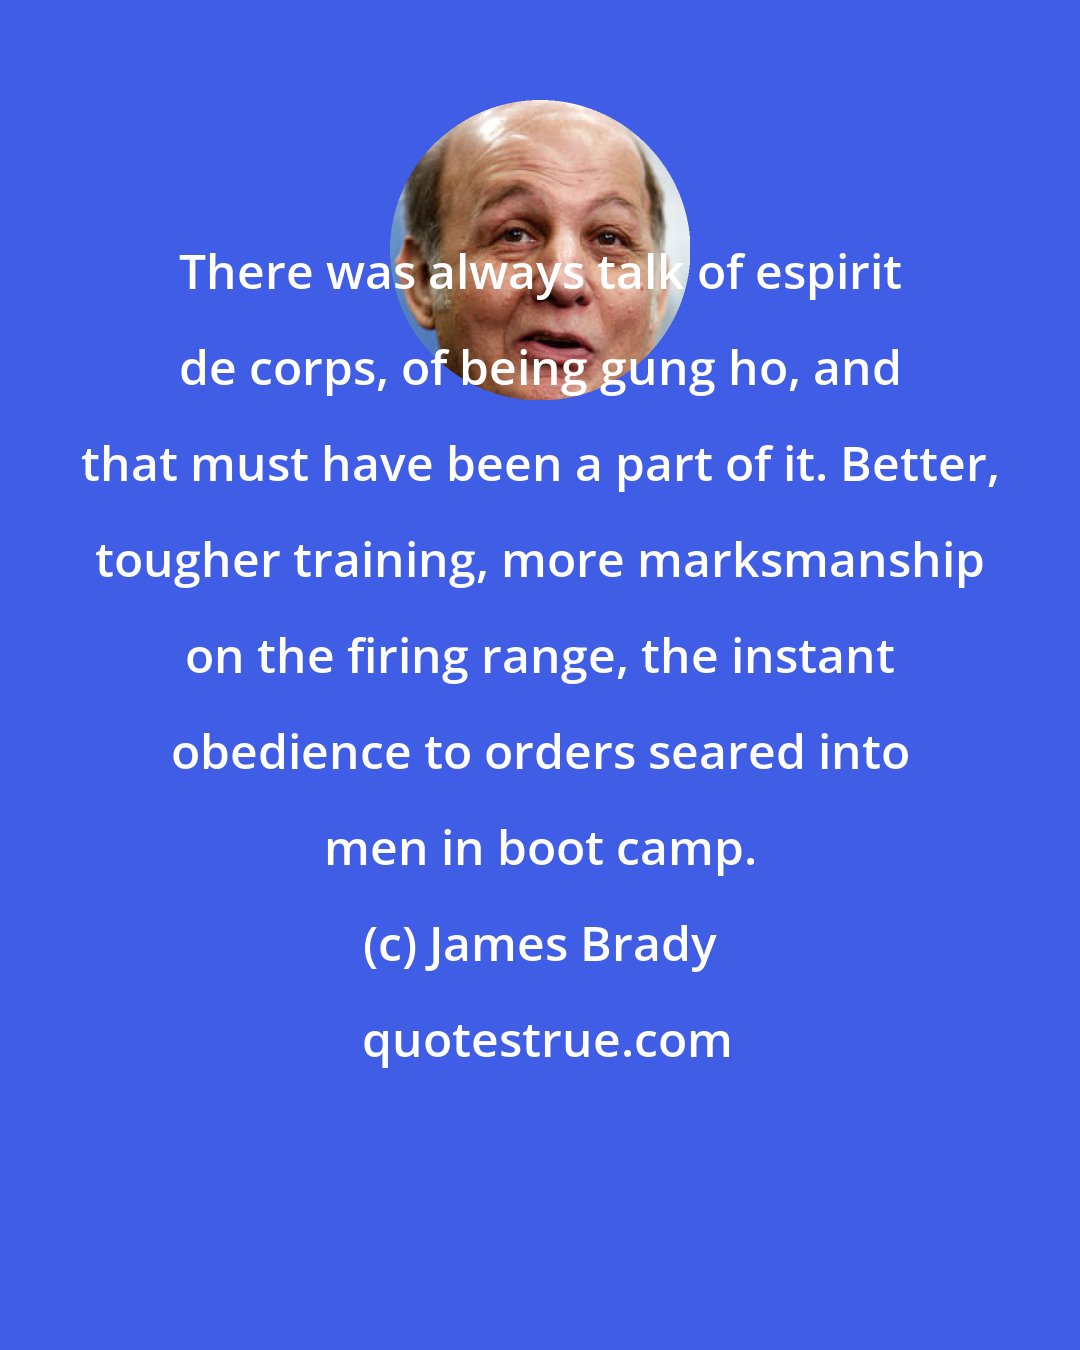 James Brady: There was always talk of espirit de corps, of being gung ho, and that must have been a part of it. Better, tougher training, more marksmanship on the firing range, the instant obedience to orders seared into men in boot camp.